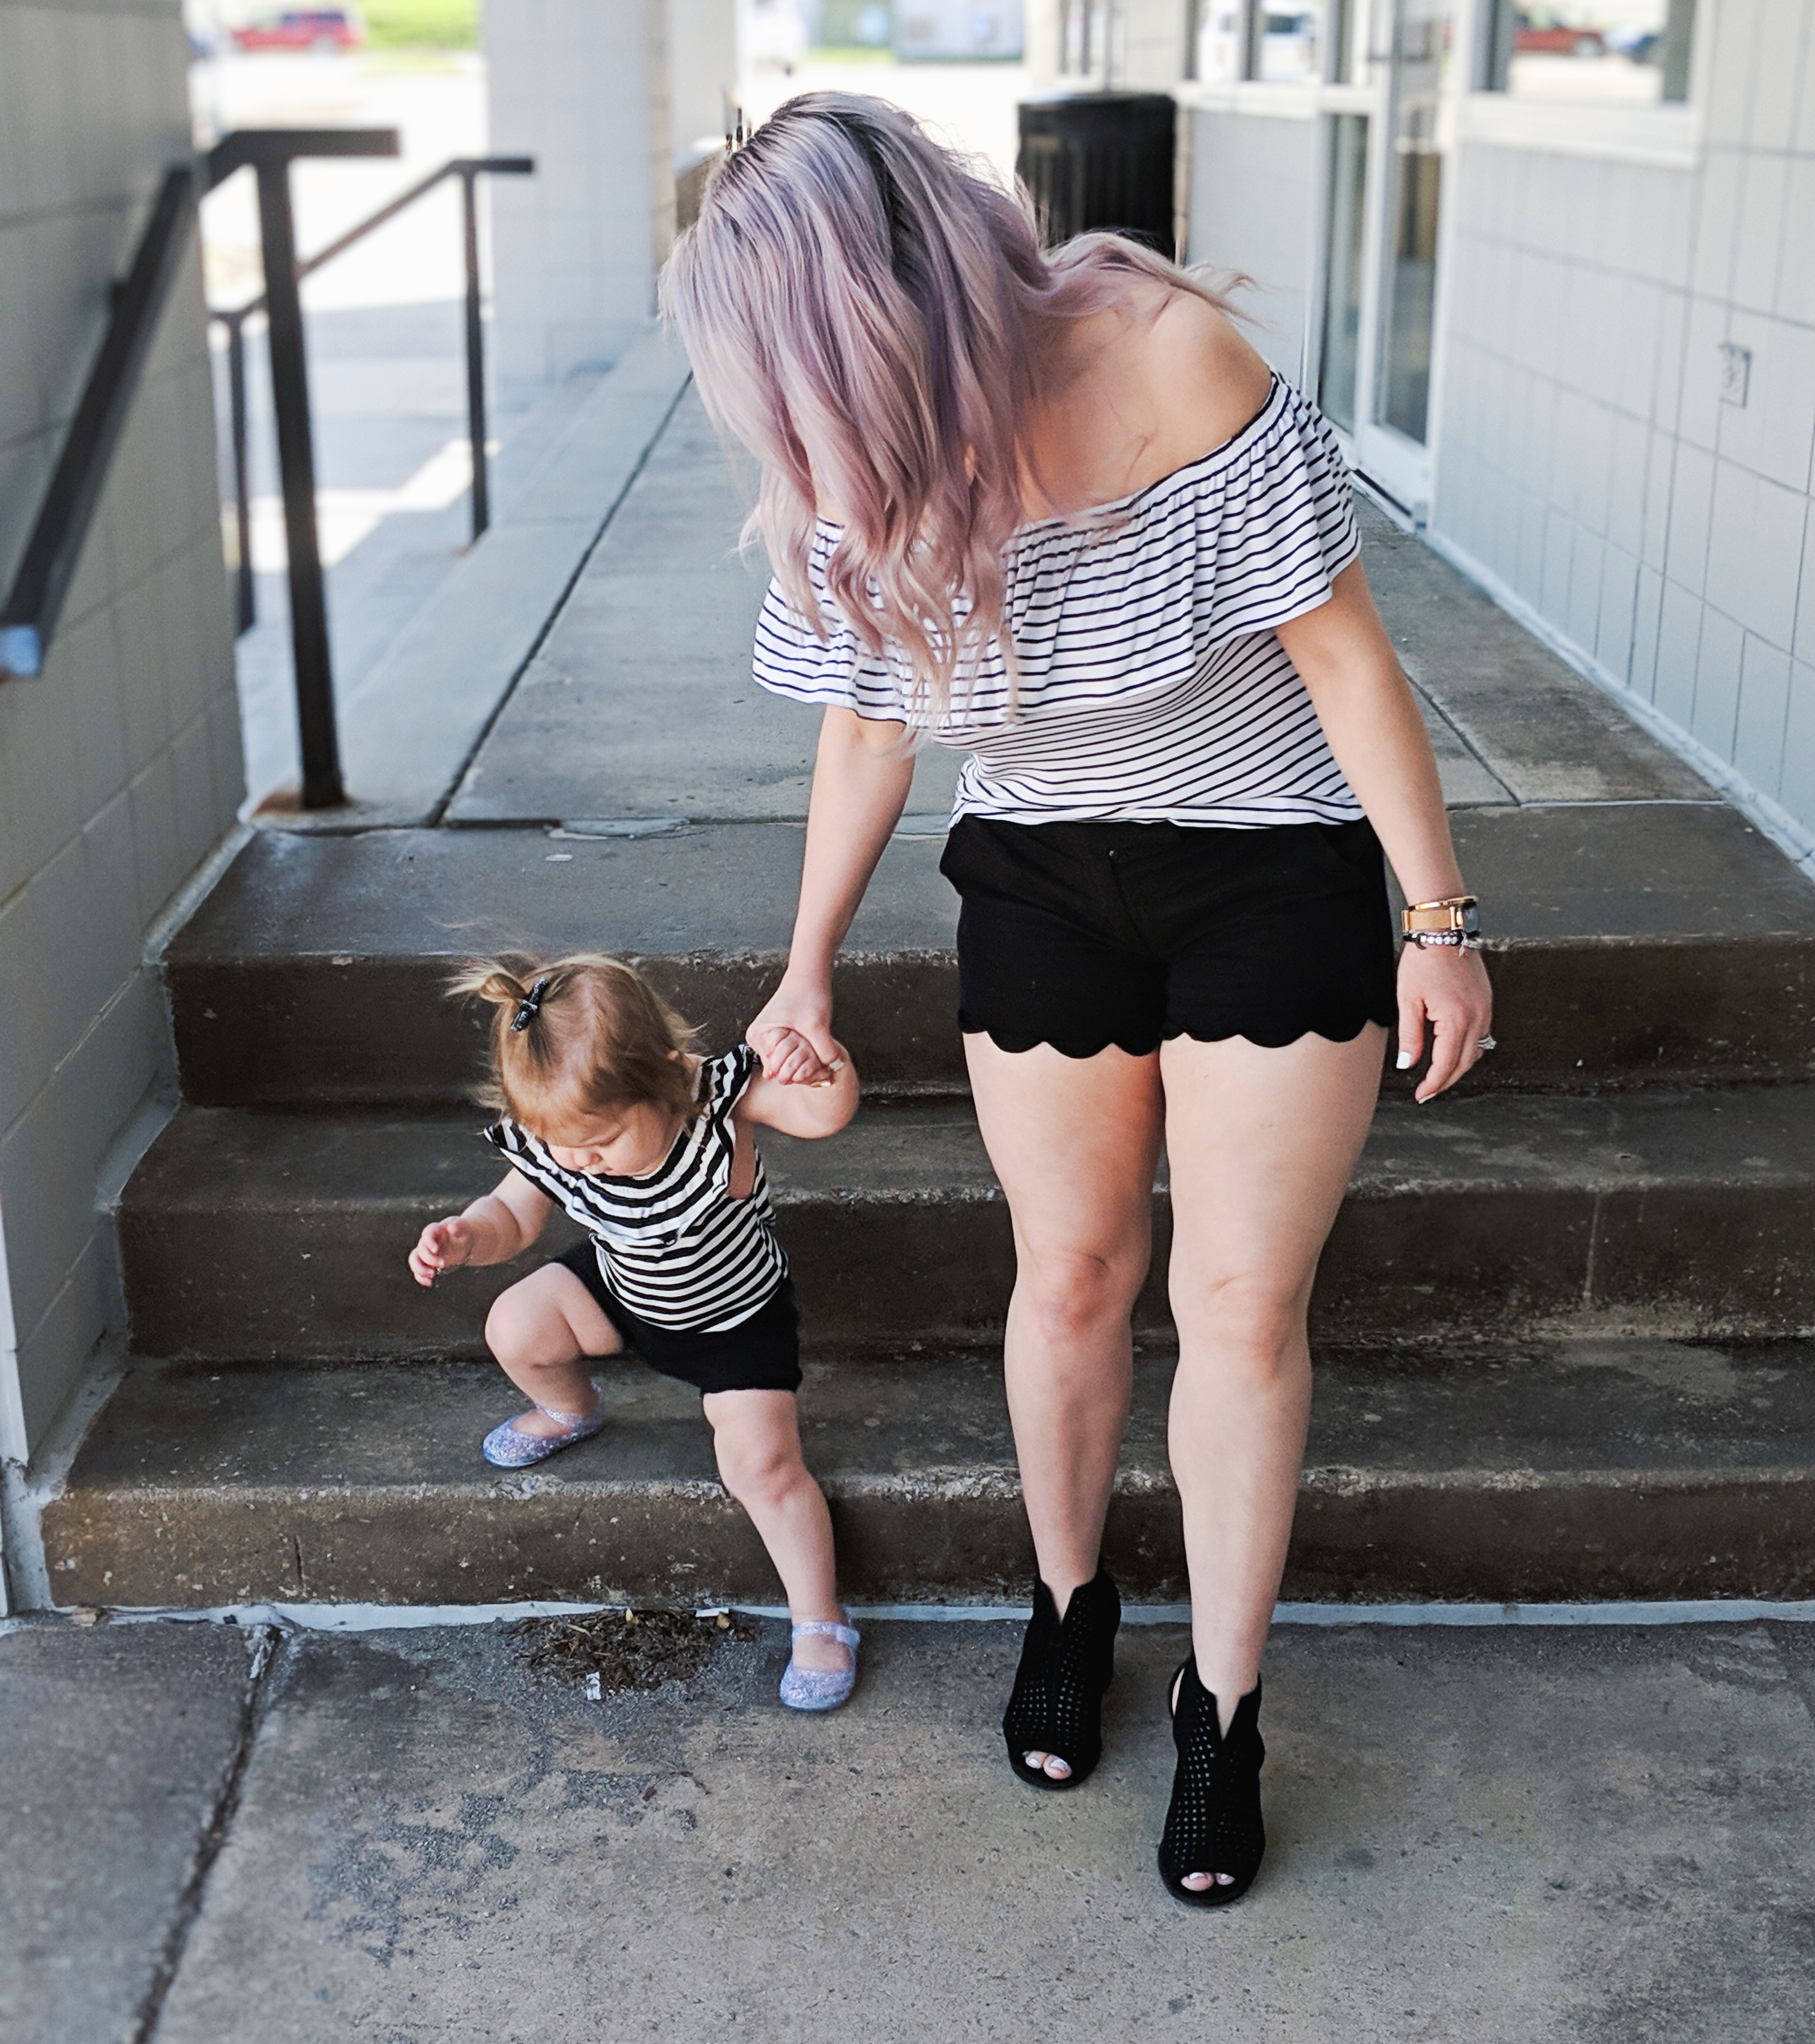 Affordable Mommy and Me Twinning Outfit Ideas: Matching outfits for mom and daughter that you can create with items already in your closets! How to get in on the trend of matching your kids affordably! Cute Mommy and Me twinning outfits 2019. #girlmom #mommyandme #twinning